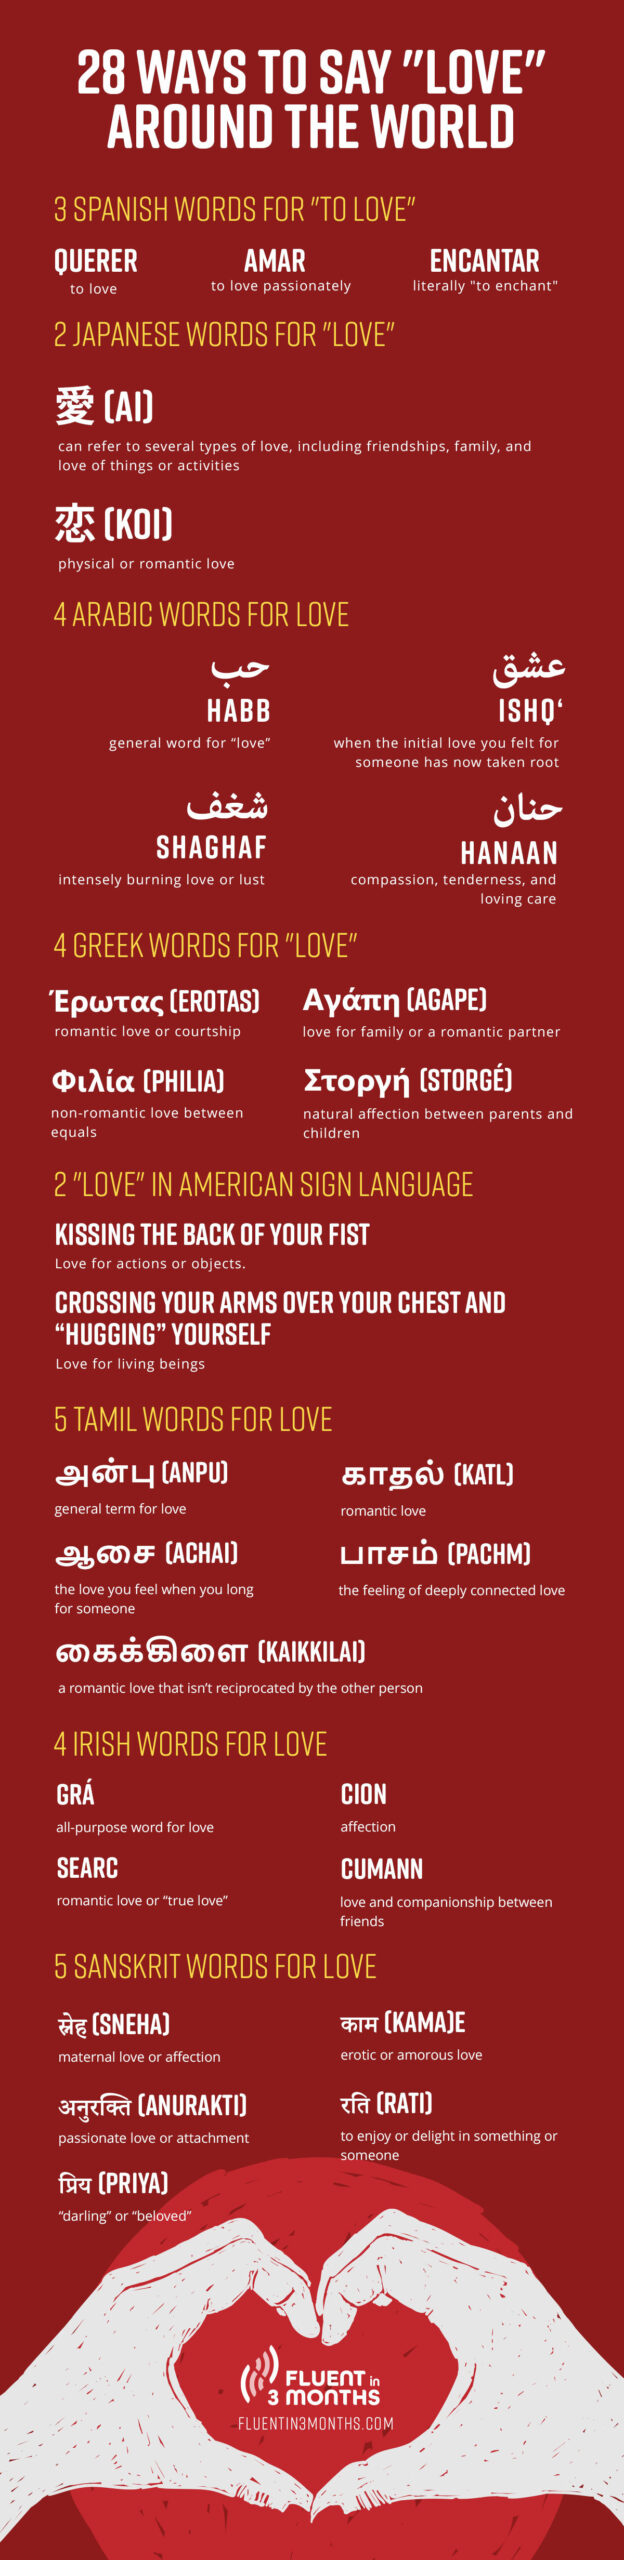 LOVE Synonym: List of 30+ Romantic Synonyms for Love in English - Love  English